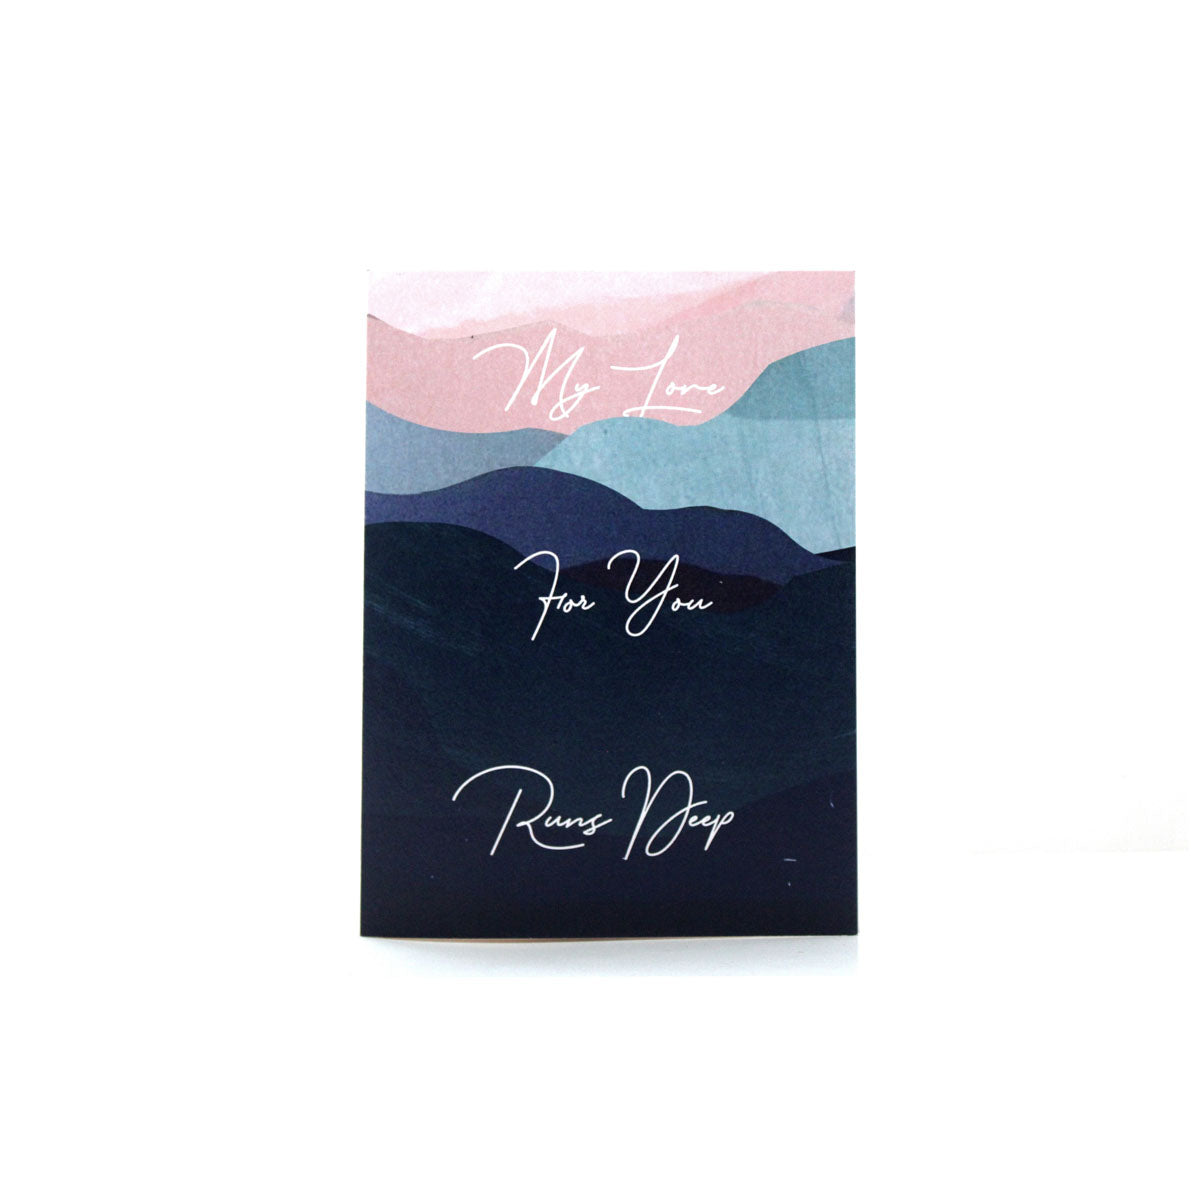 love runs deep card that reads "My love for you runs deep" with pink and blue scenic mountain illustration.